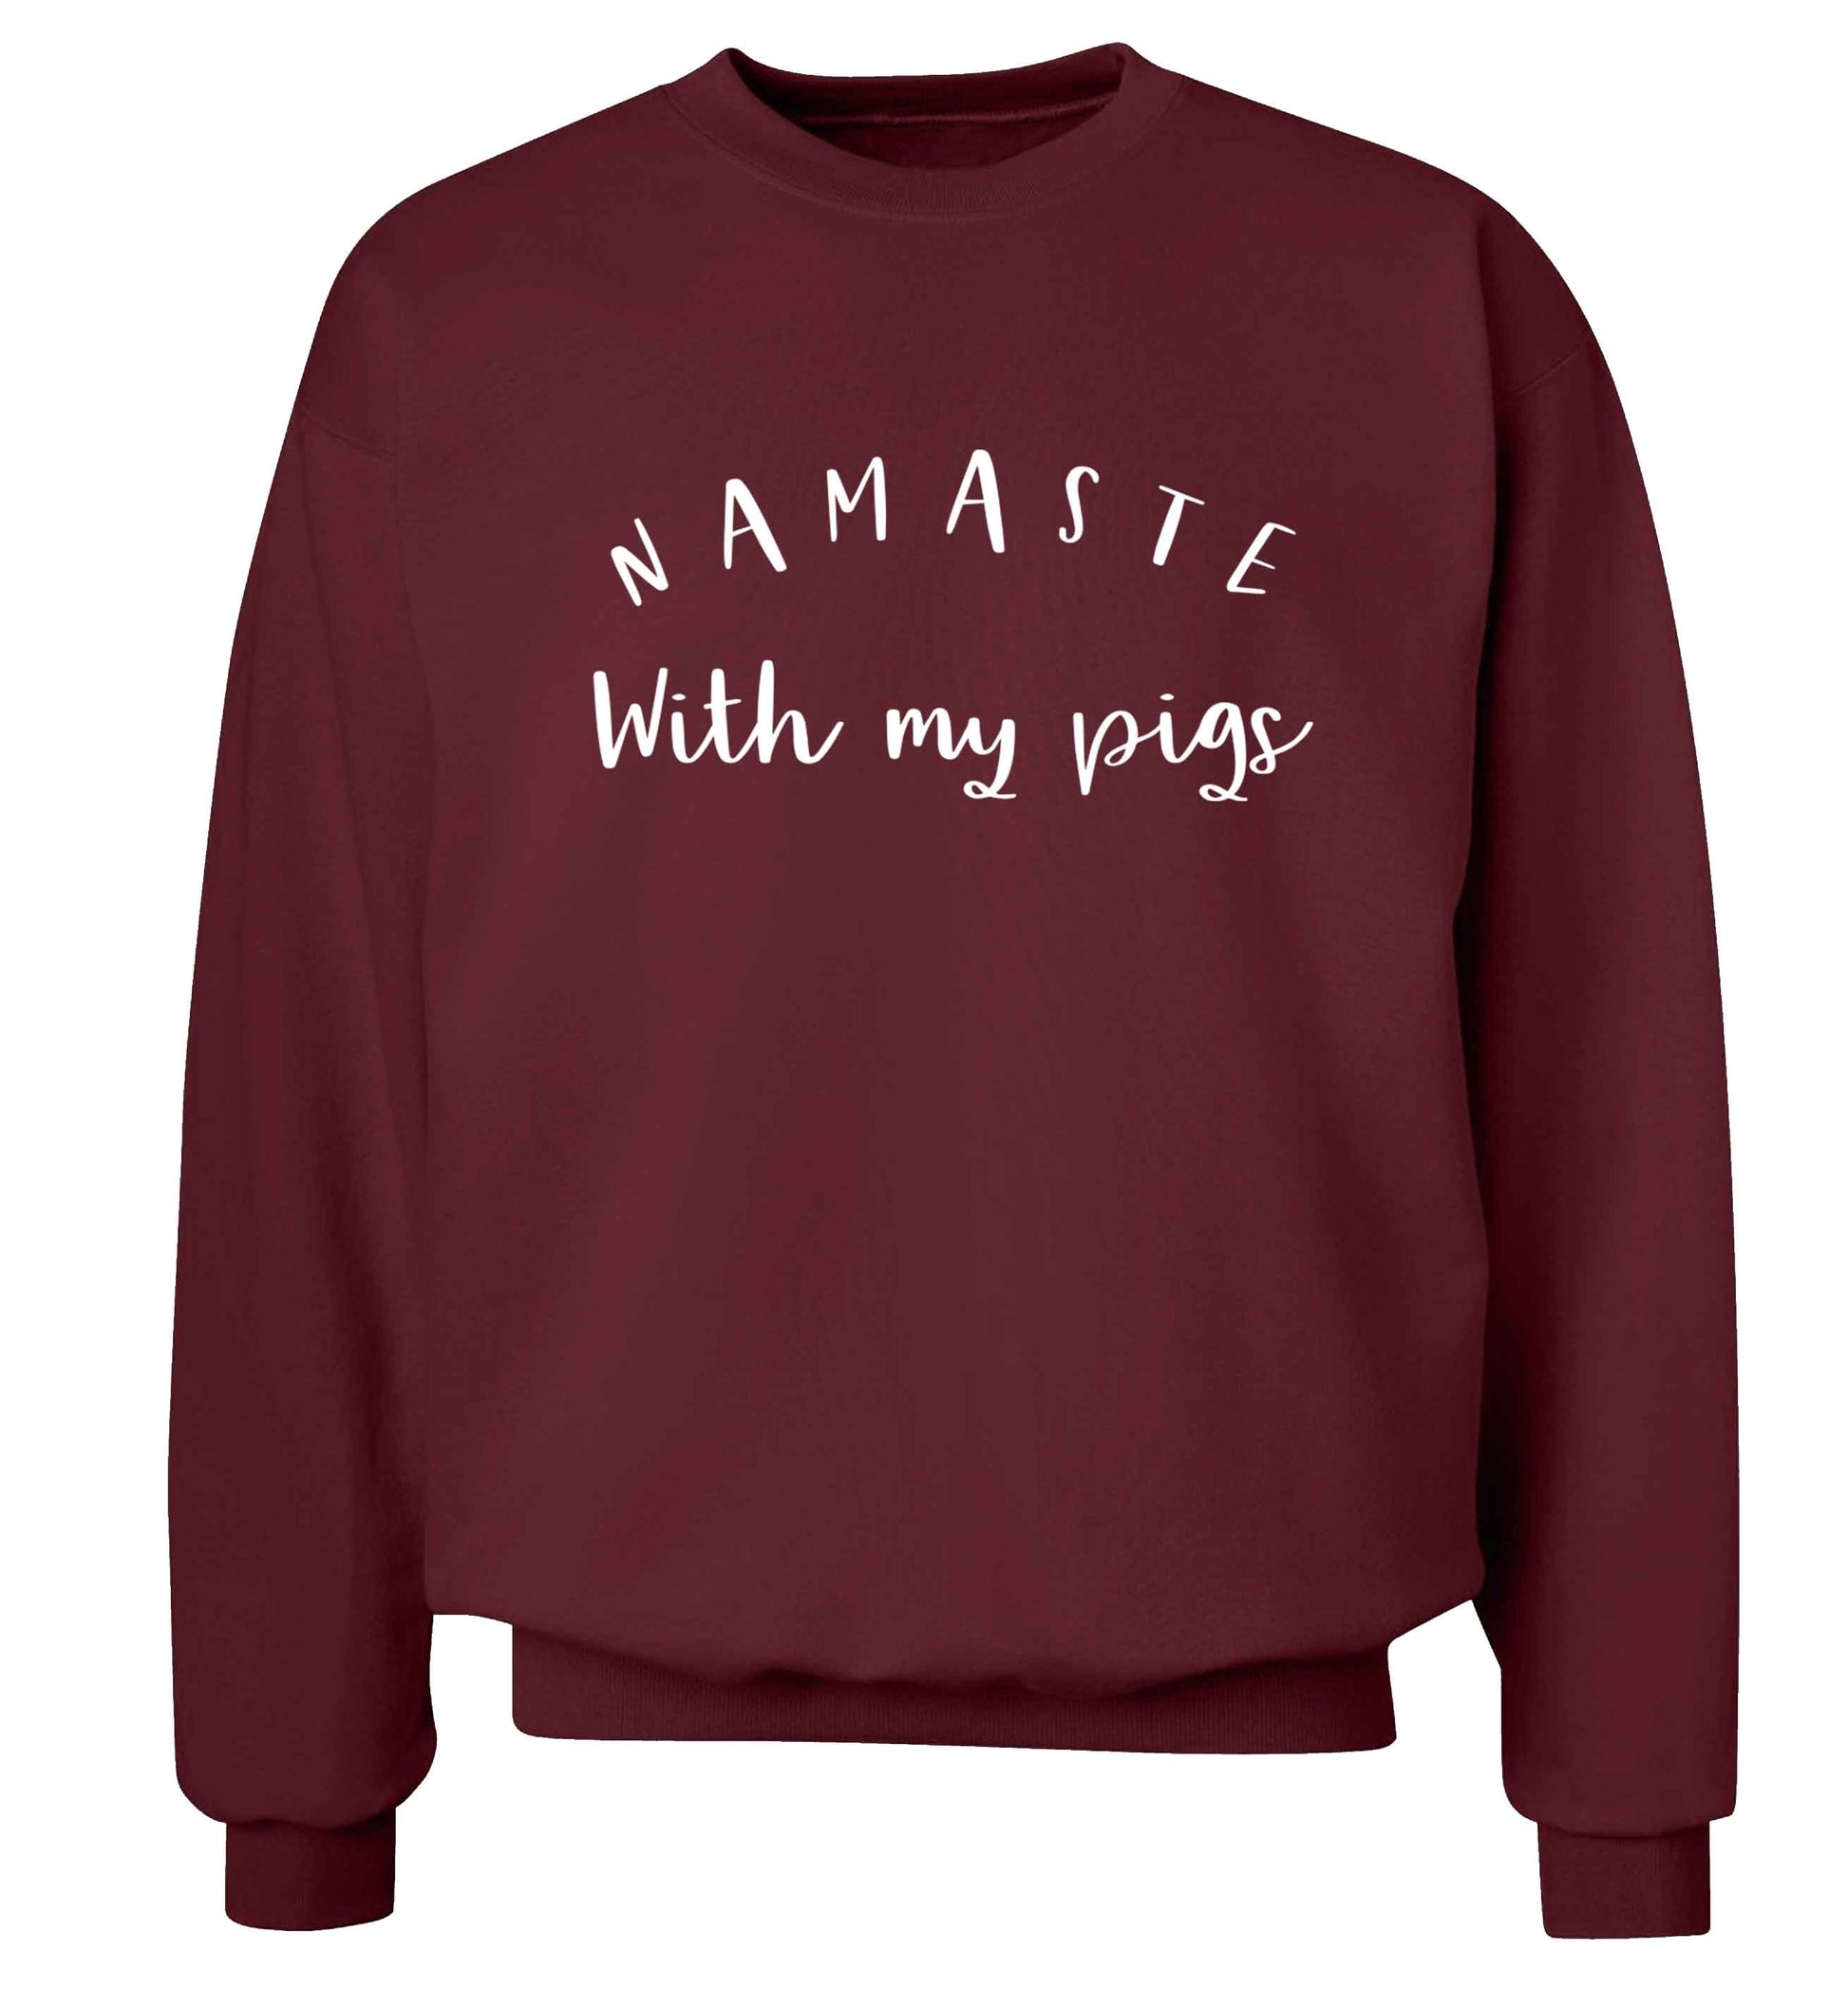 Namaste with my pigs Adult's unisex maroon Sweater 2XL